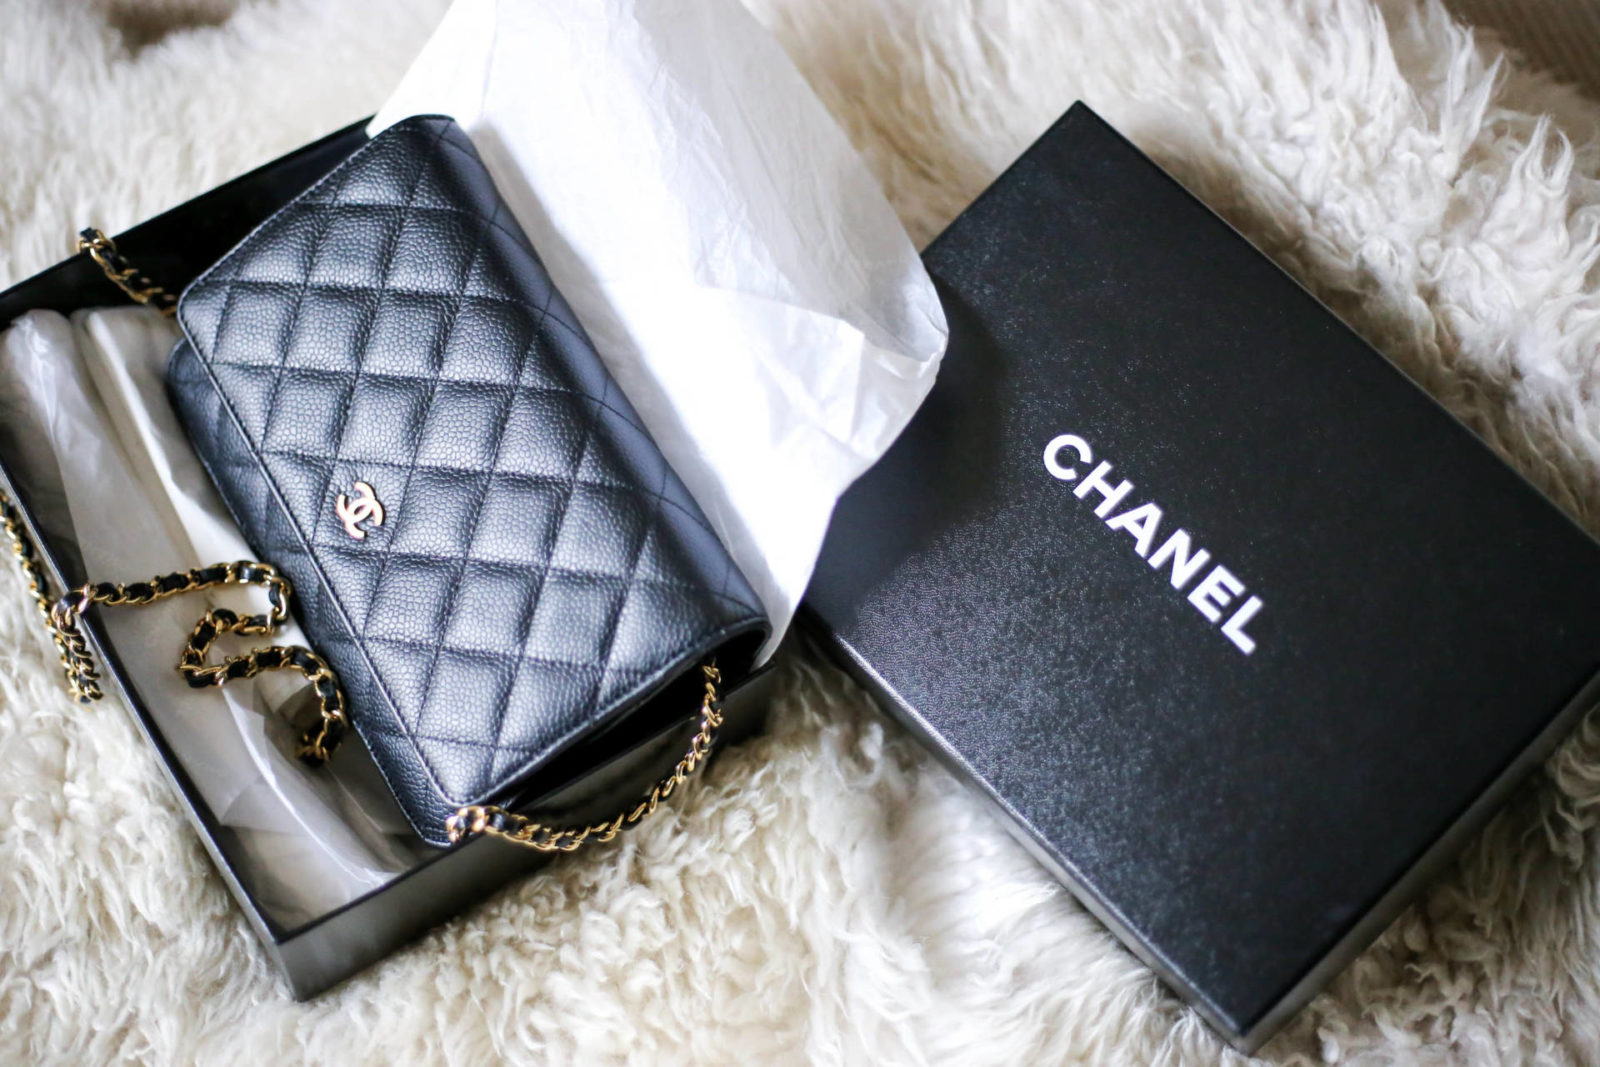 NEW IN: Chanel Wallet On Chain heyyyjune.